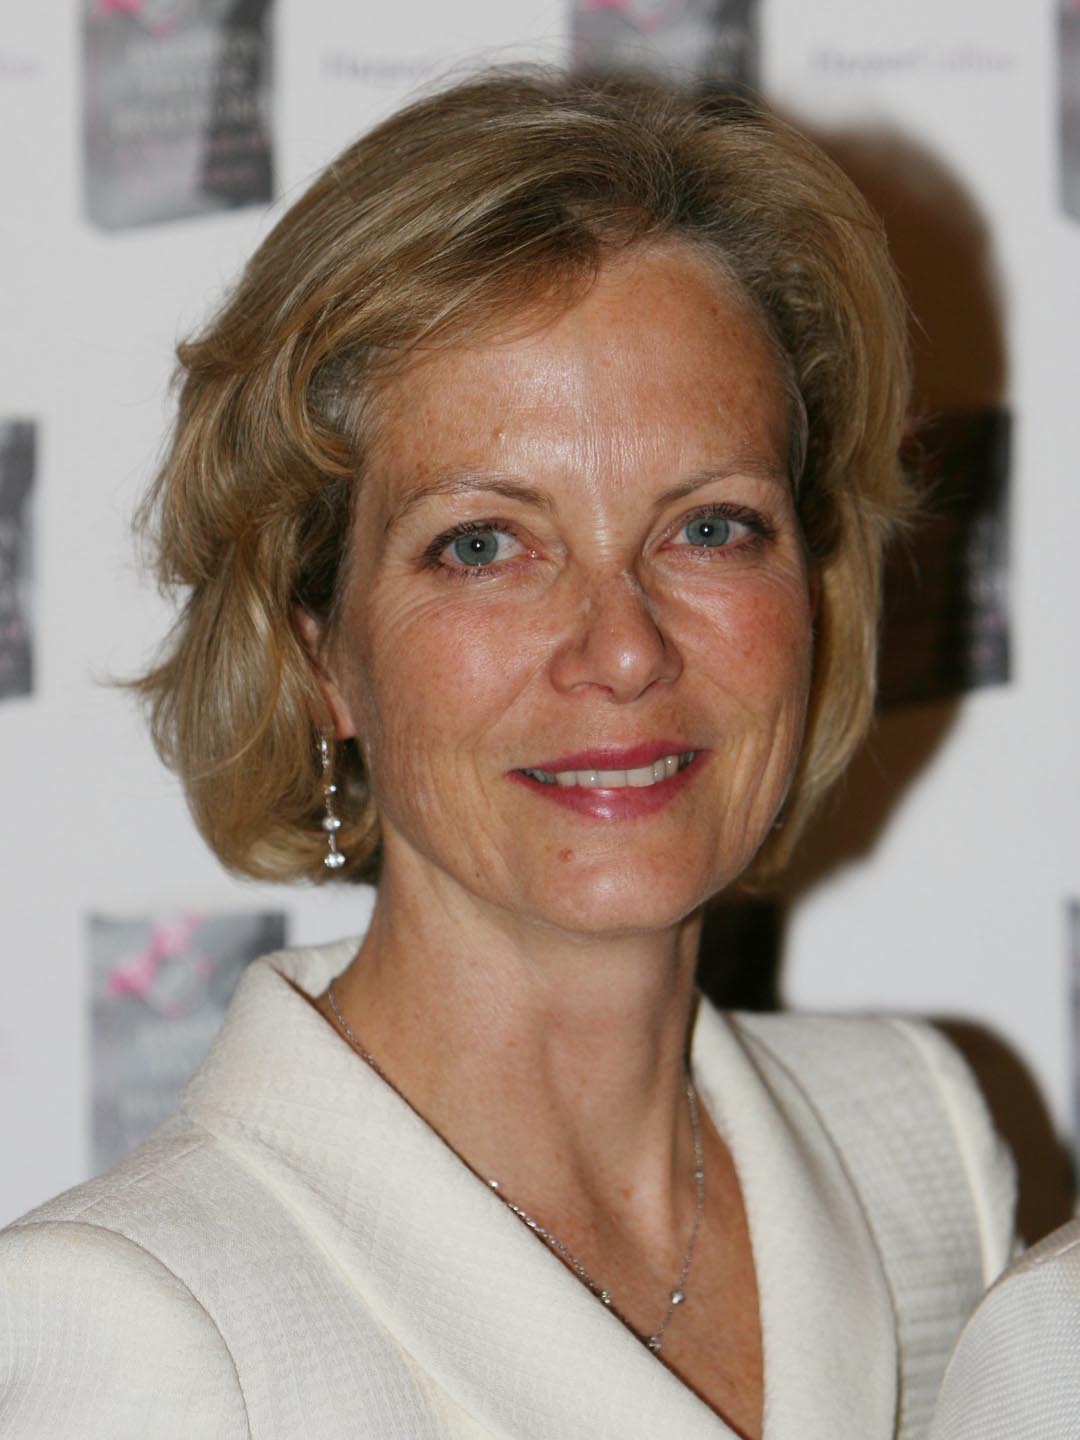 How tall is Jenny Seagrove?